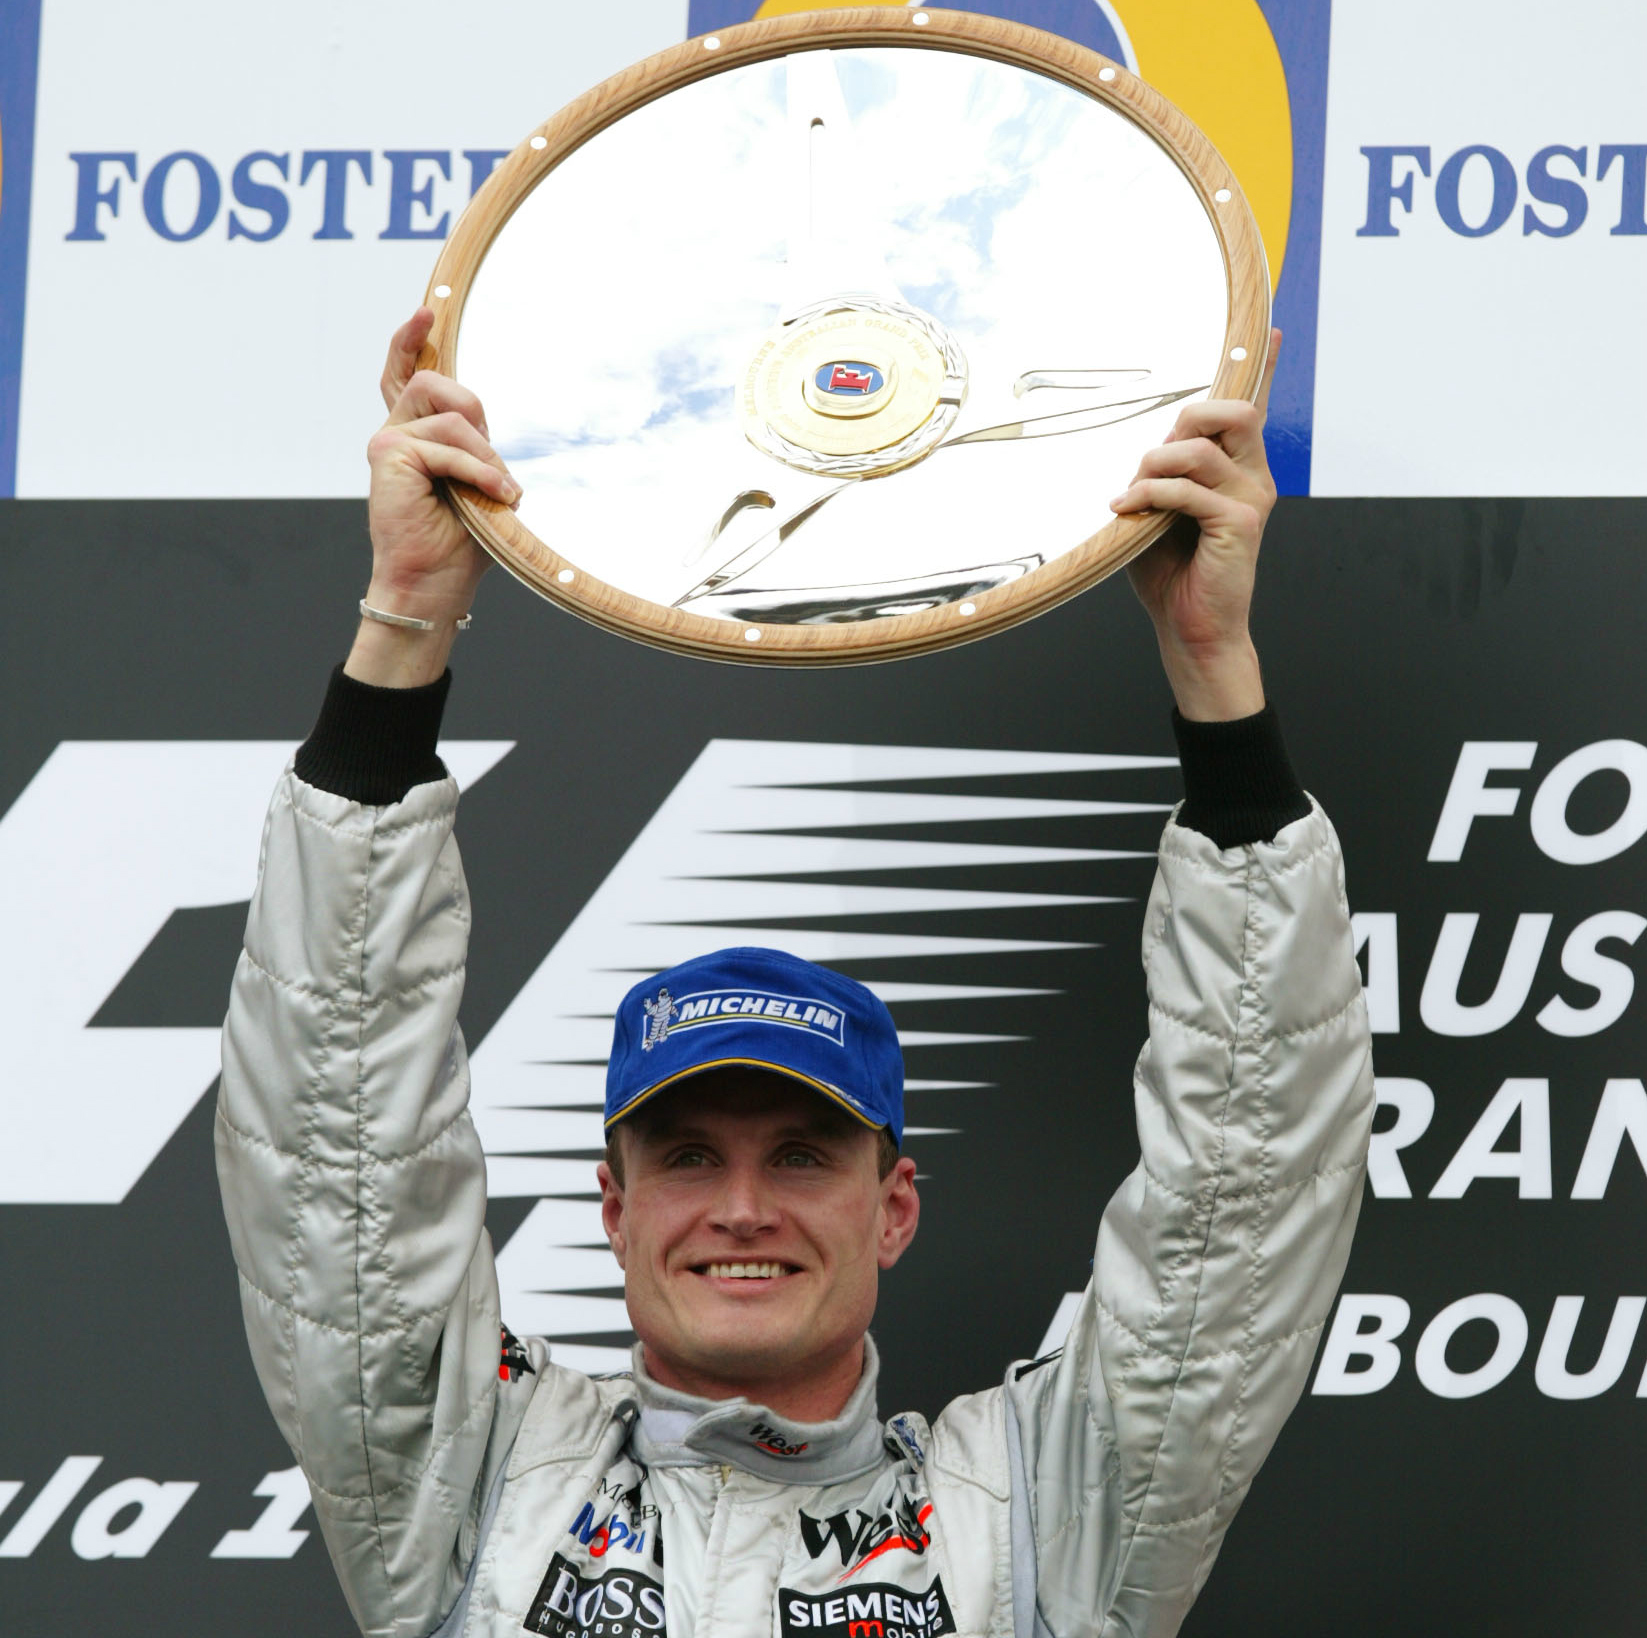 What helped power British race ace David Coulthard to Formula One victories